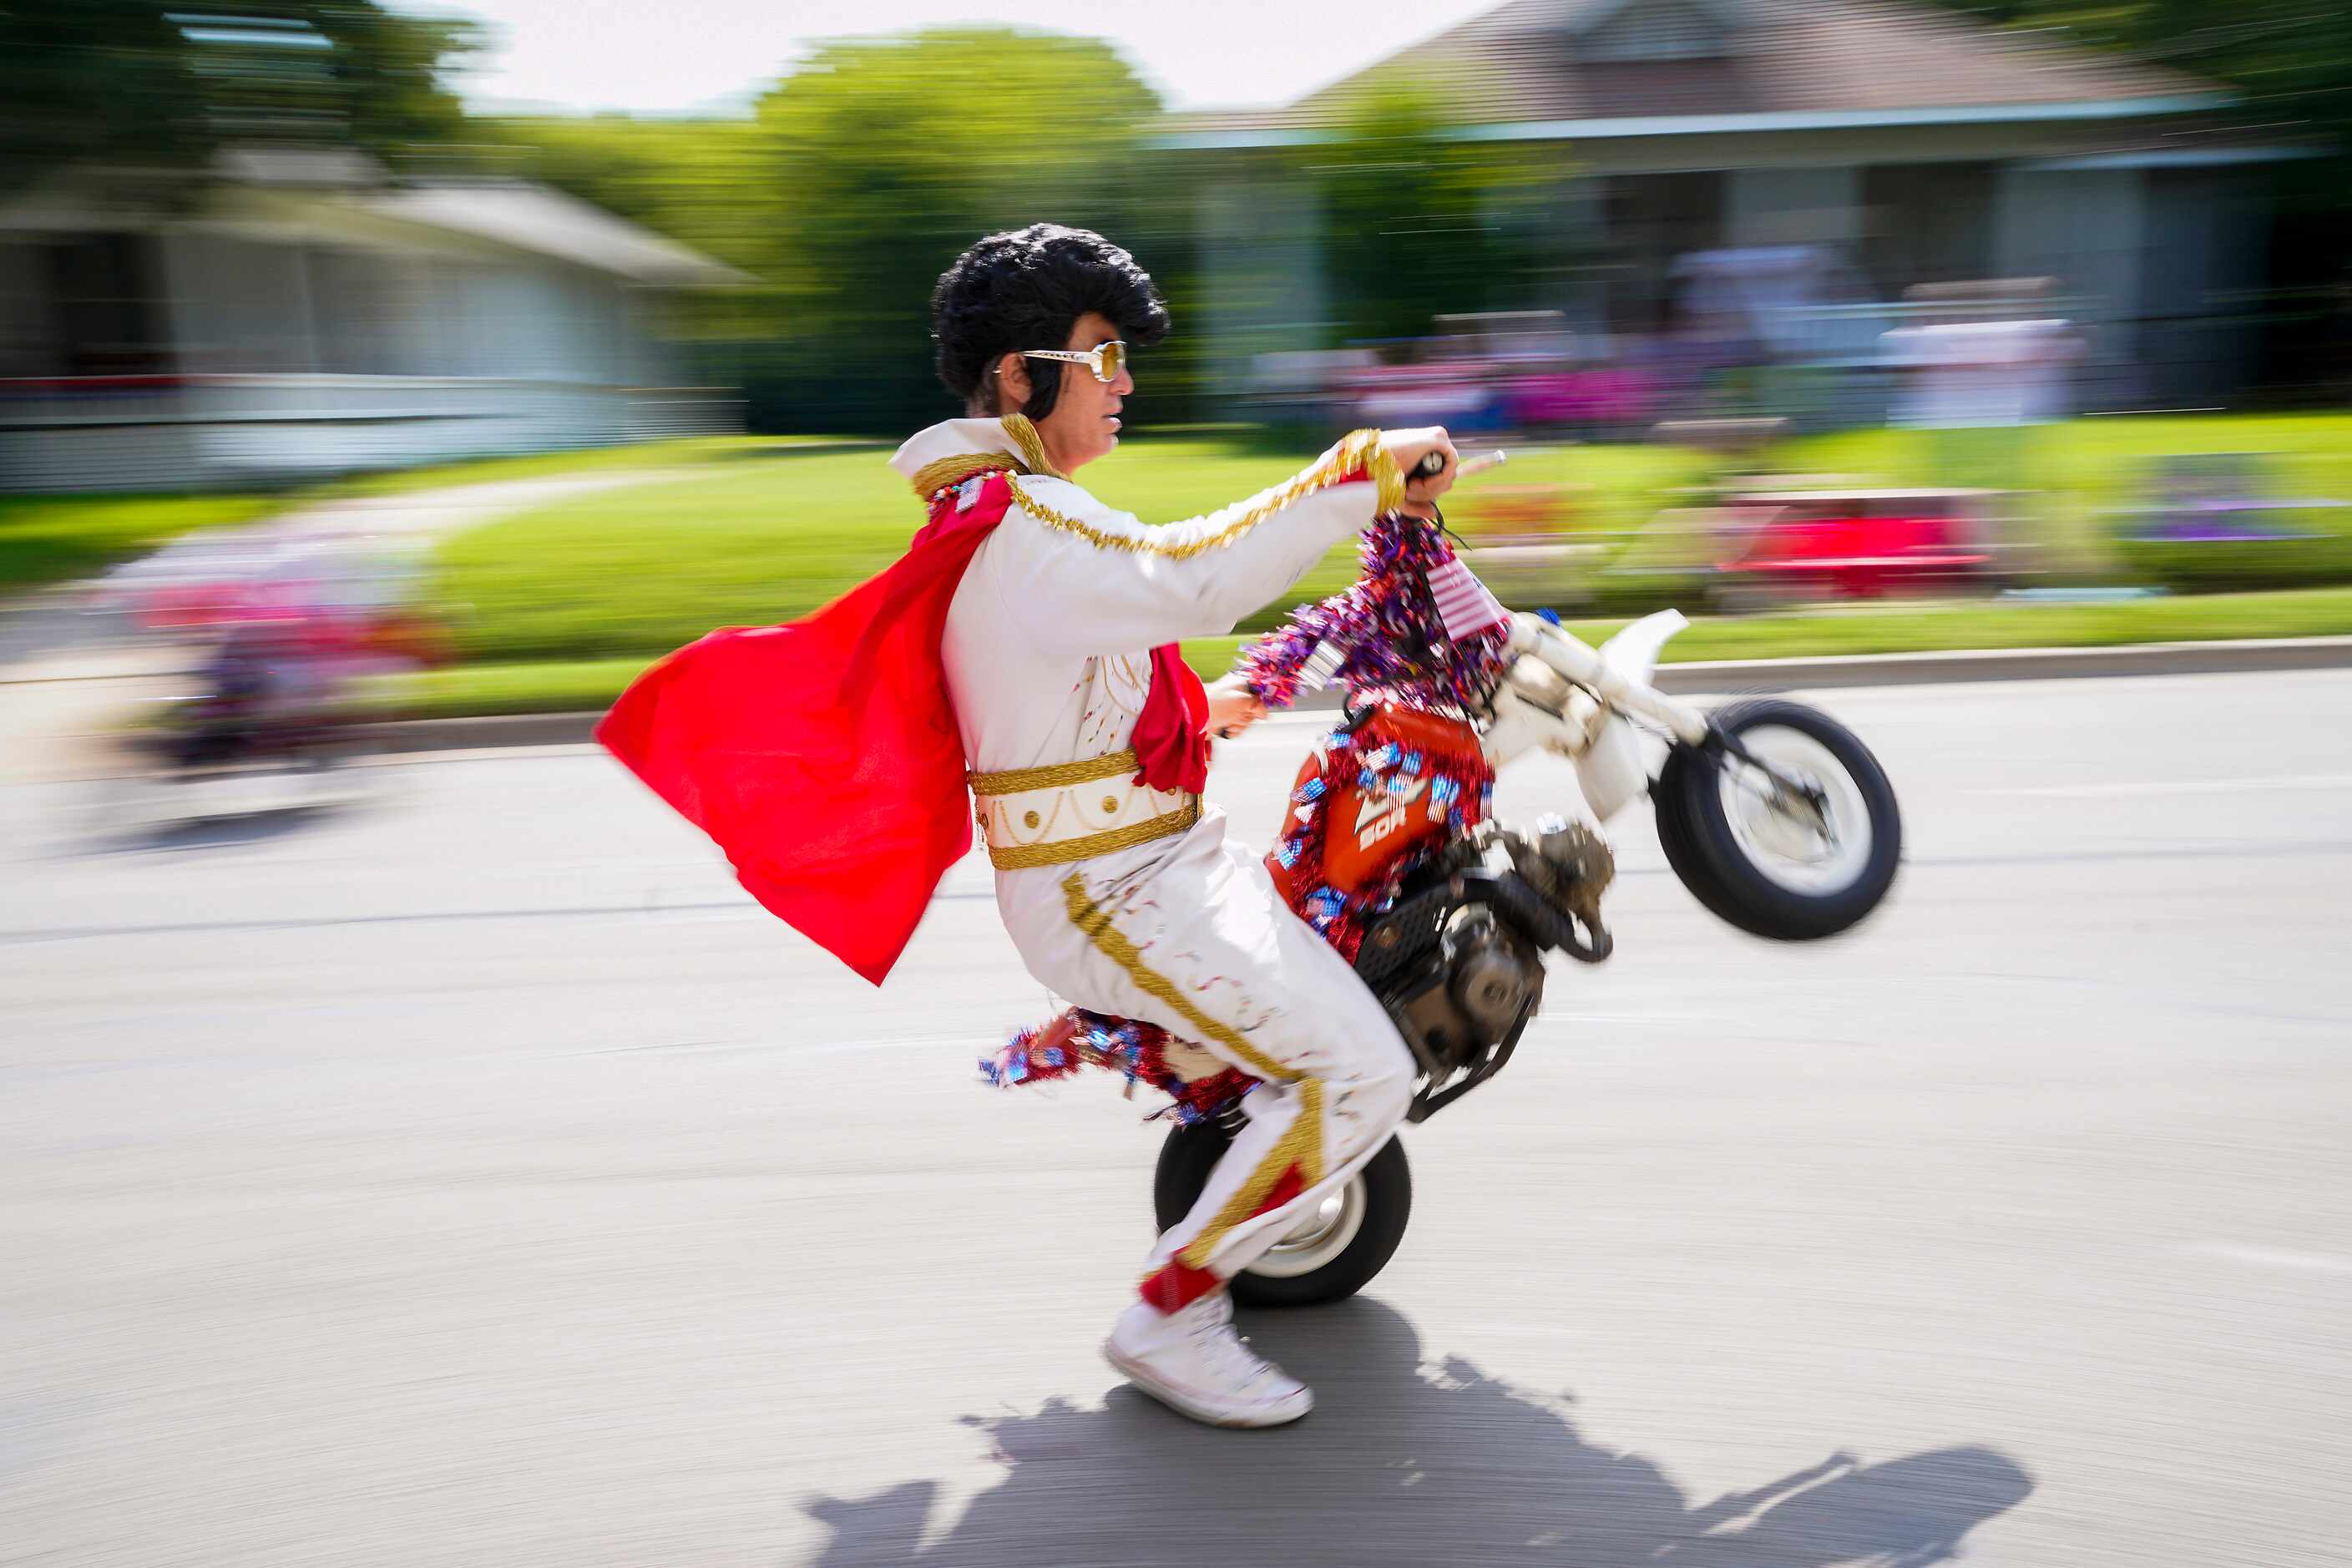 Members of the The World Famous Wheelie-ing Elvi ride in the Arlington Independence Day...